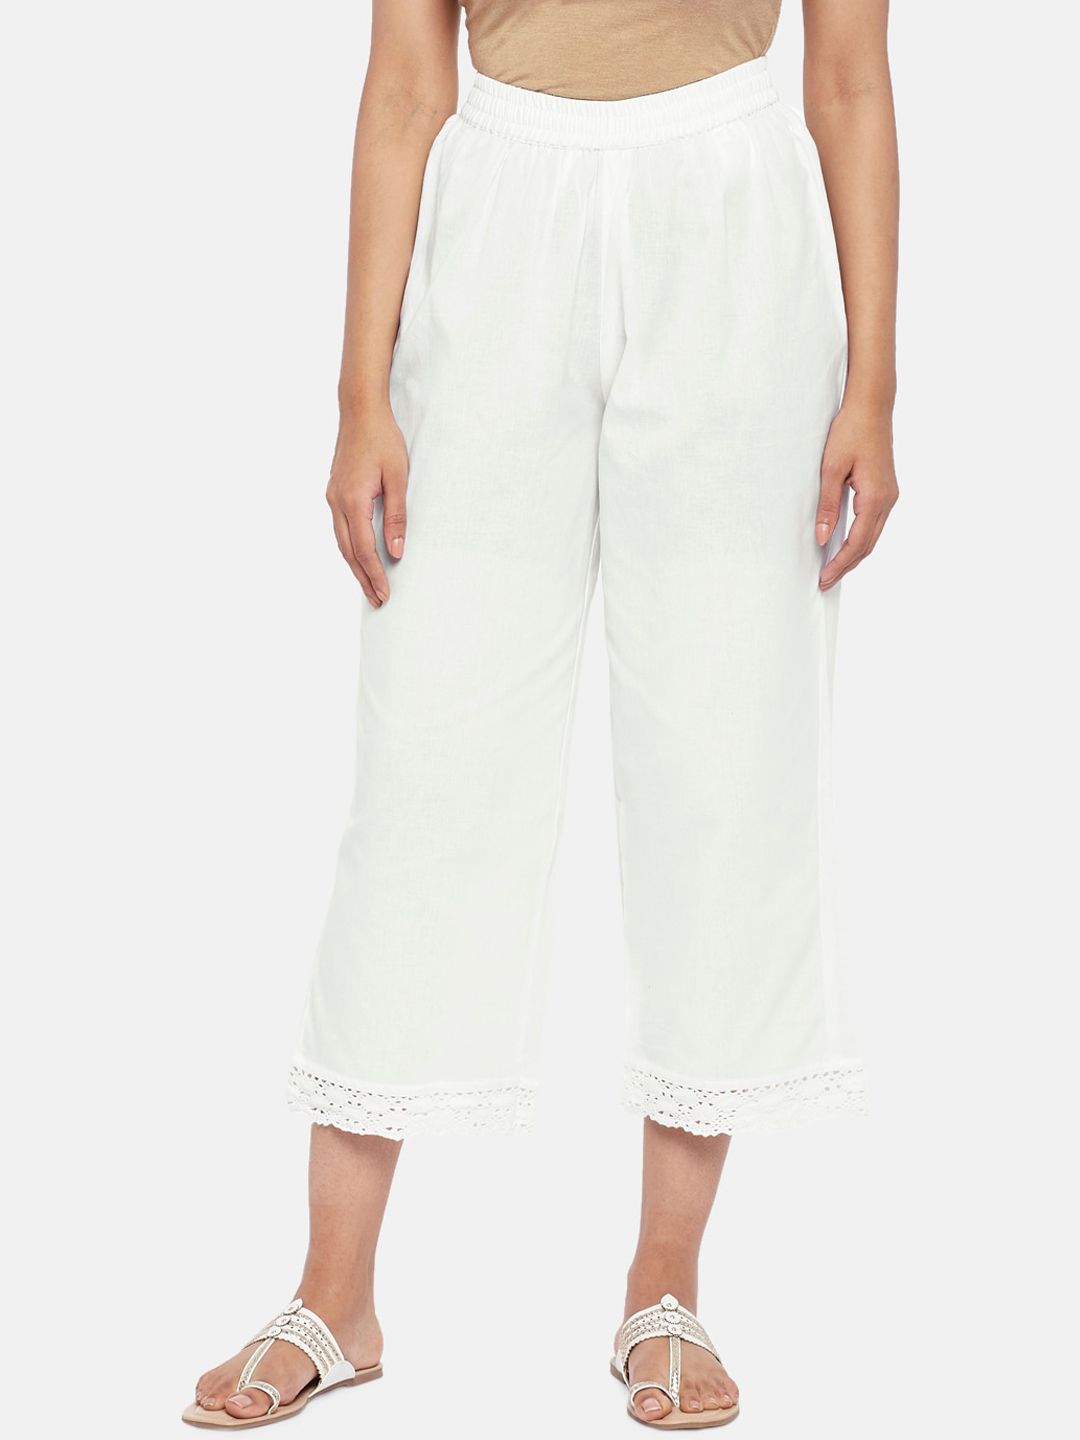 RANGMANCH BY PANTALOONS Women White Culottes Trousers Price in India